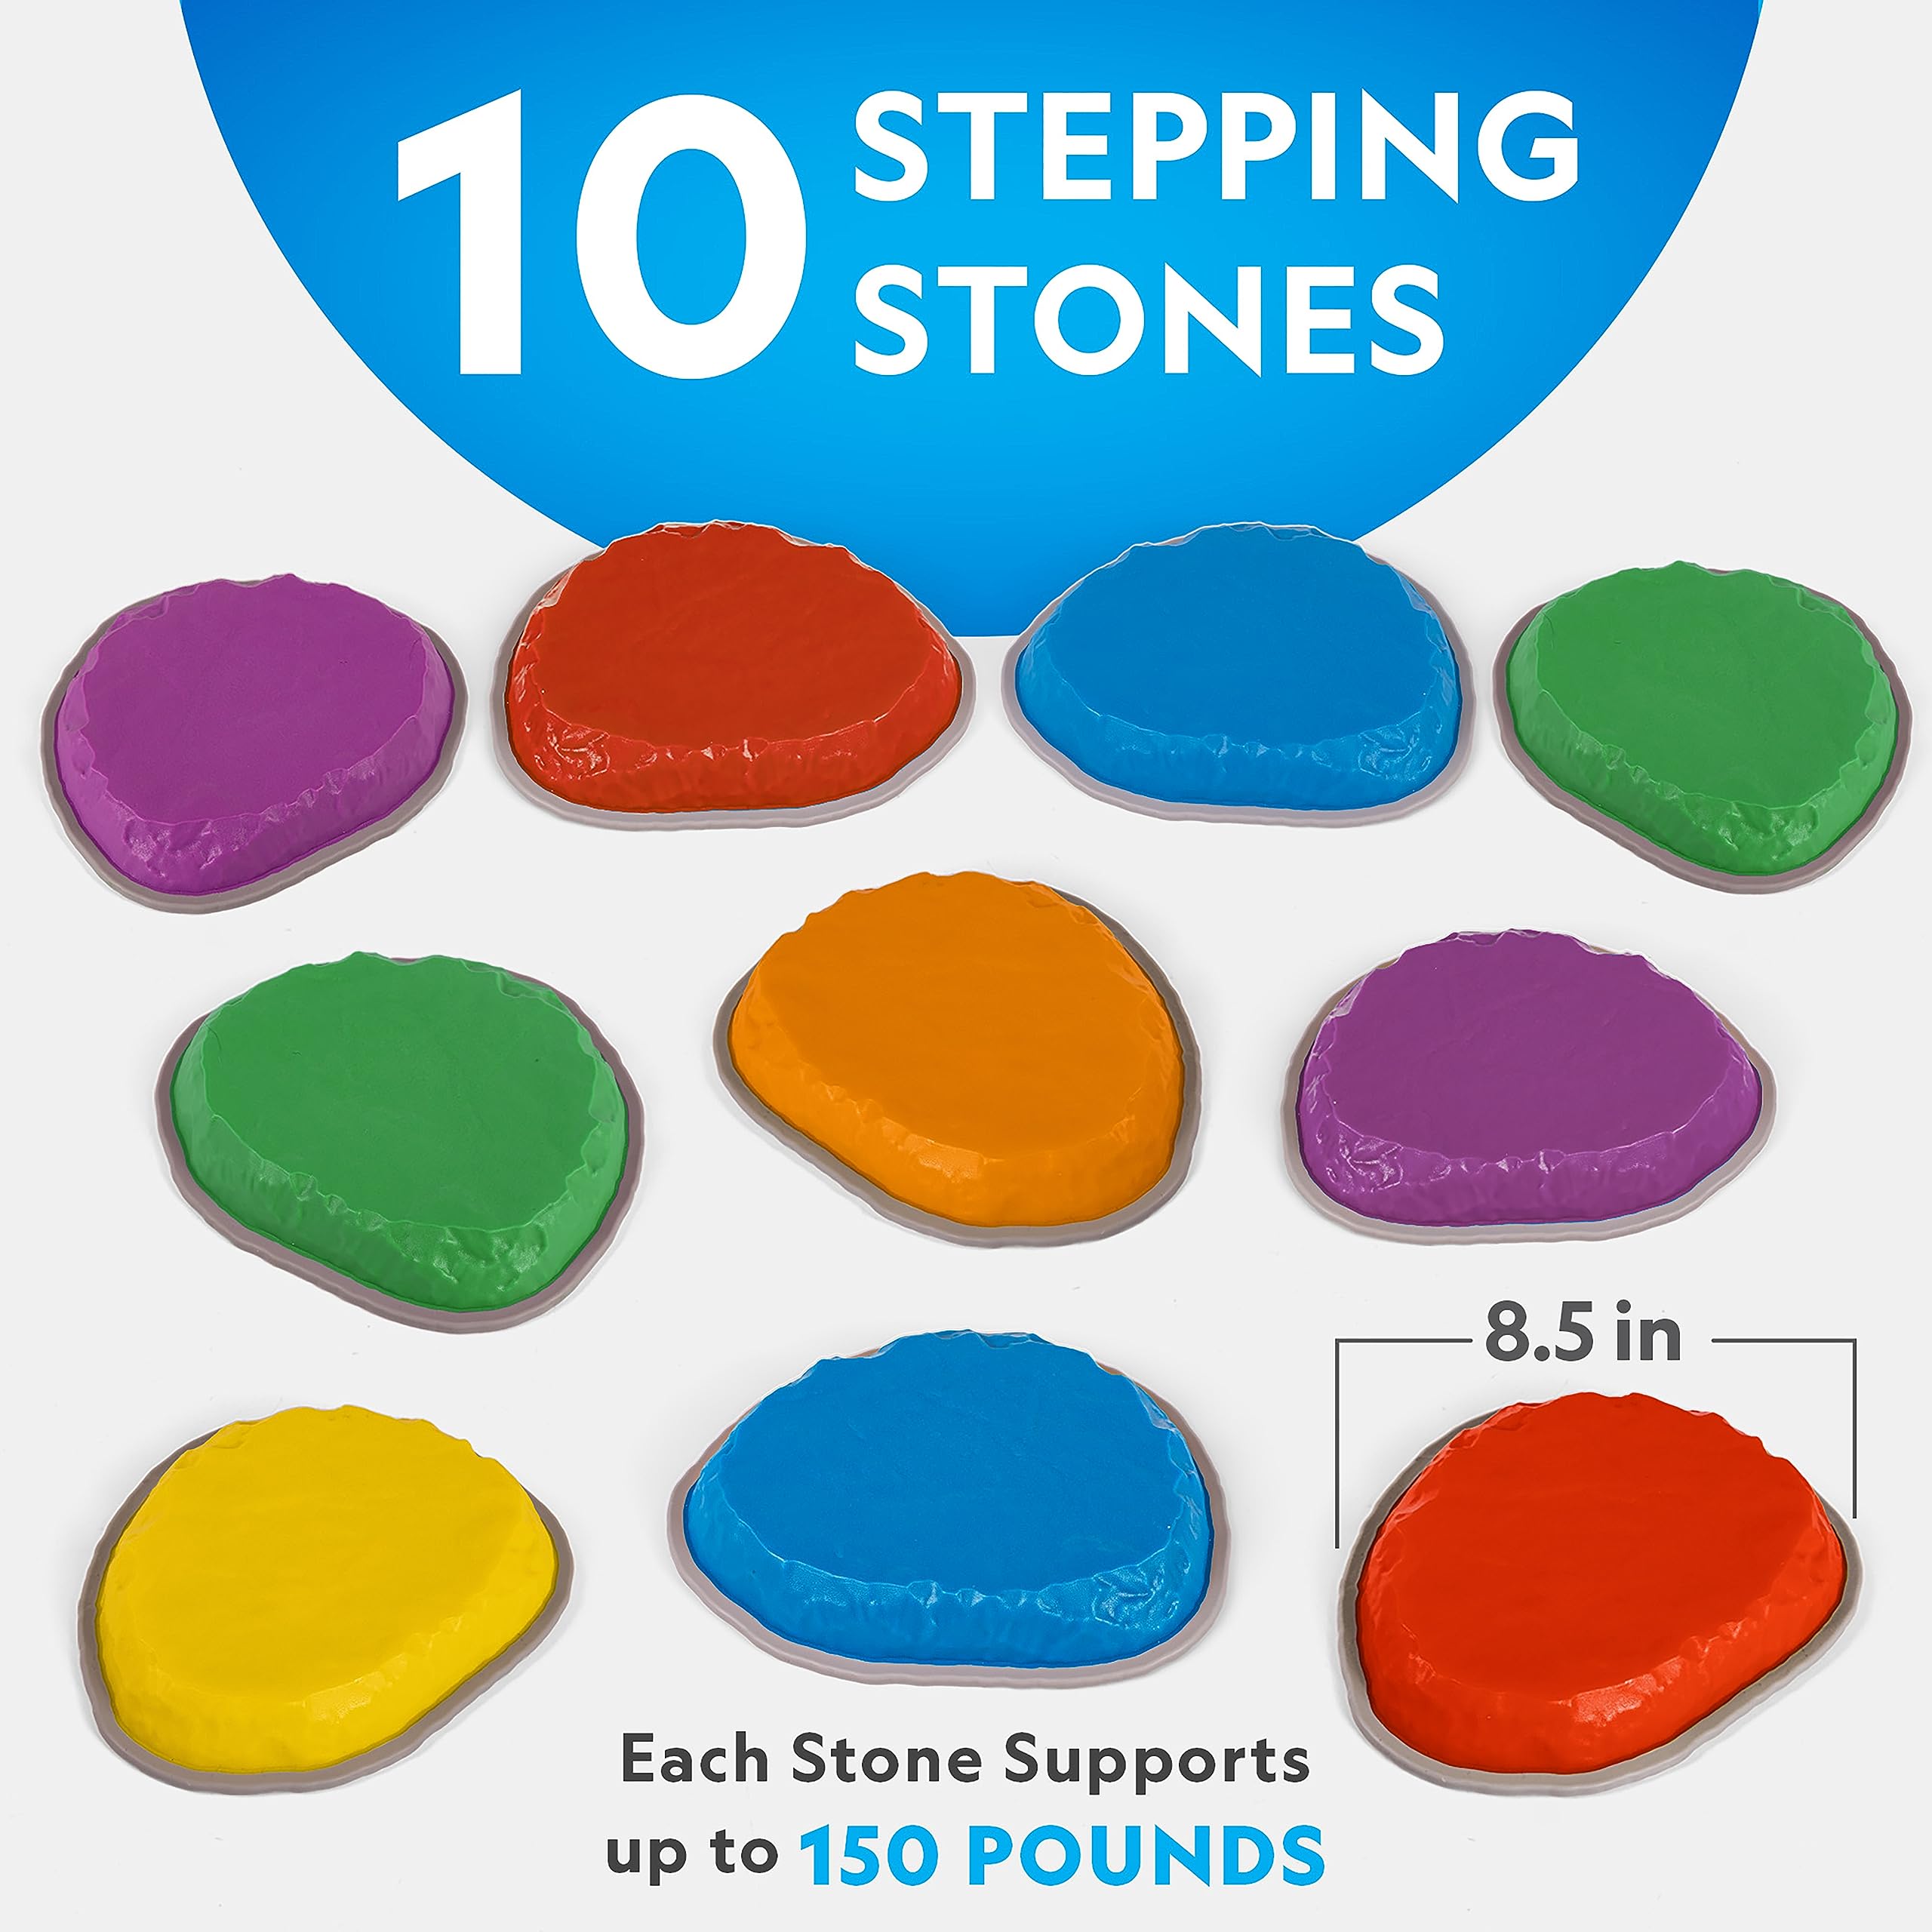 NATIONAL GEOGRAPHIC Stepping Stones for Kids – 10 Durable Non-Slip Stones Encourage Toddler Balance & Gross Motor Skills, Indoor & Outdoor Toys, Balance Stones, Obstacle Course (Amazon Exclusive)